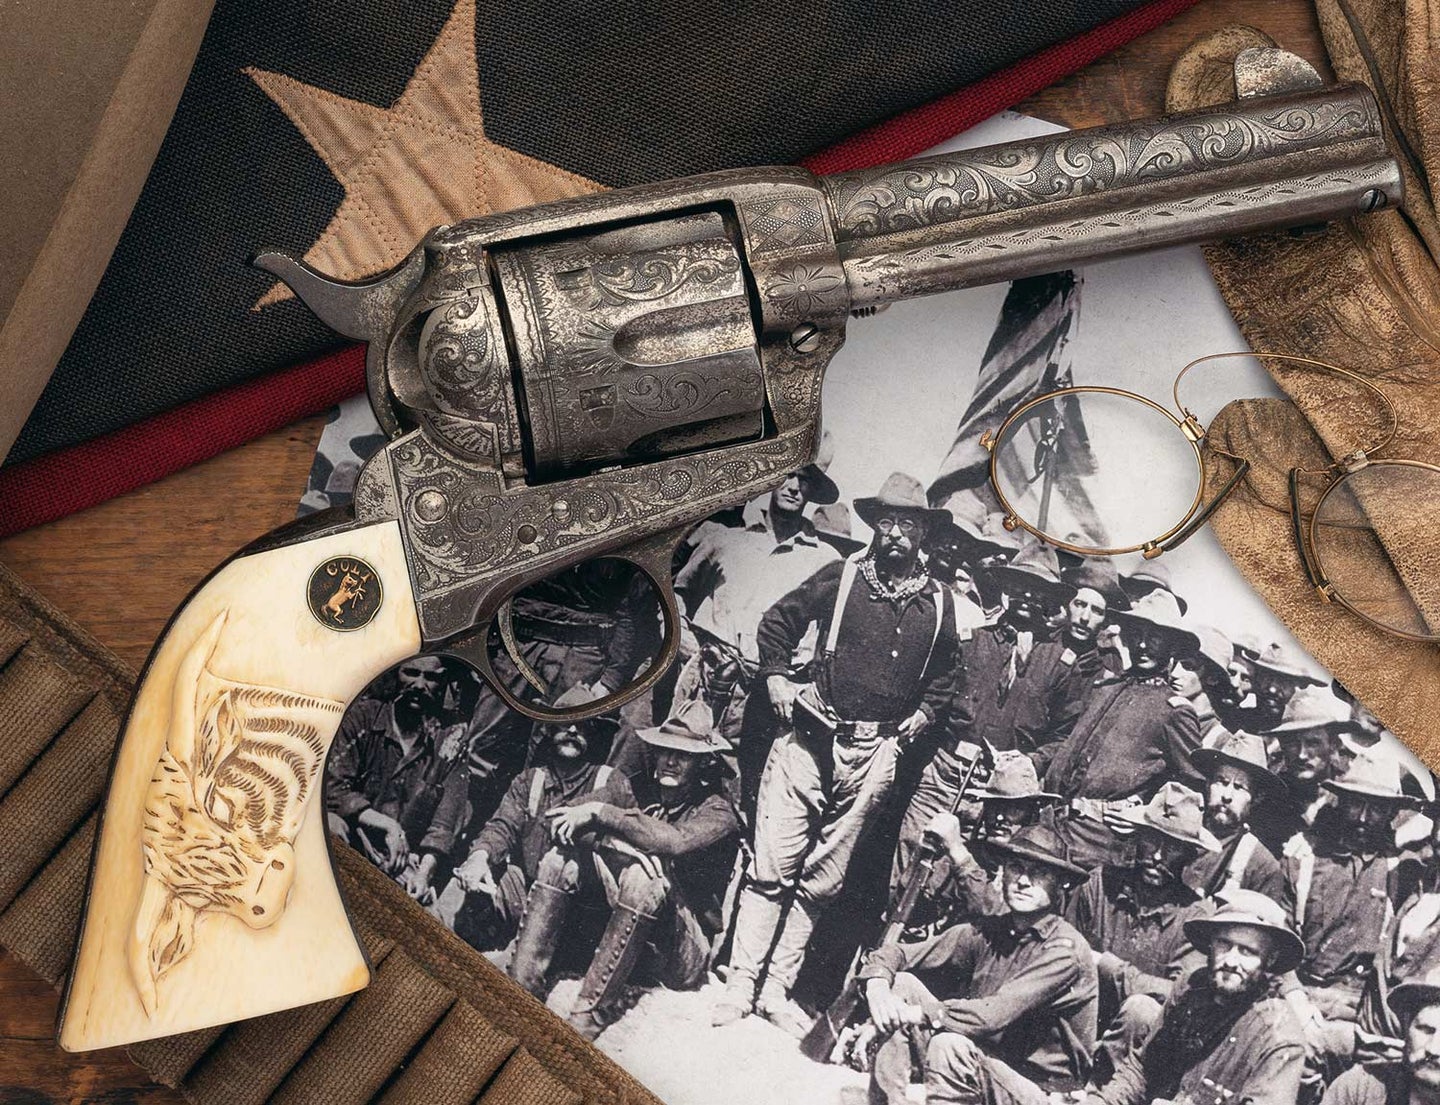 A Colt single action army revolver on an antique photo and flag.